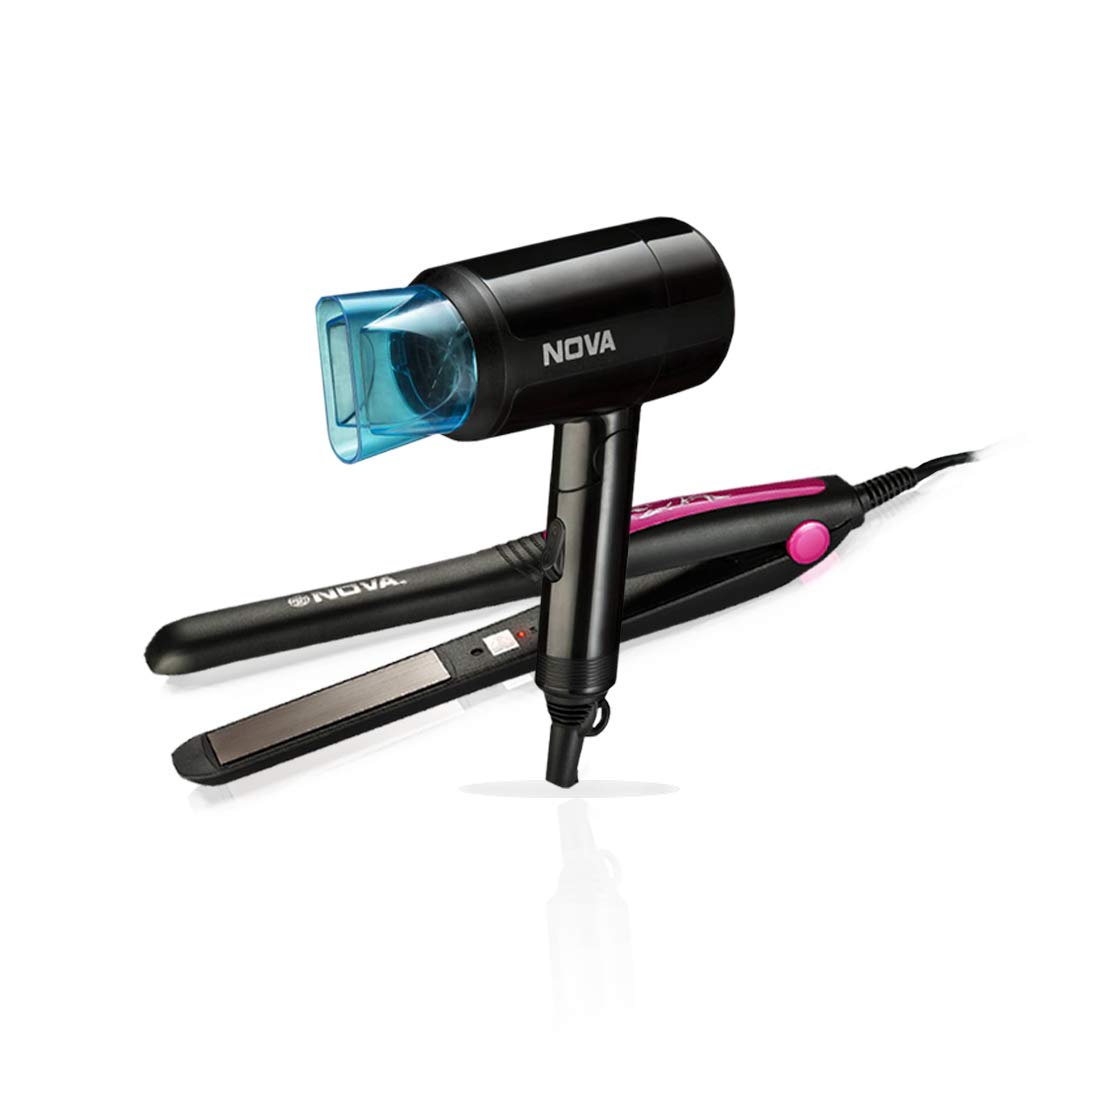 COMBO OFFER | Buy Hair Dryers and Straightener Combo at Under Rs.999